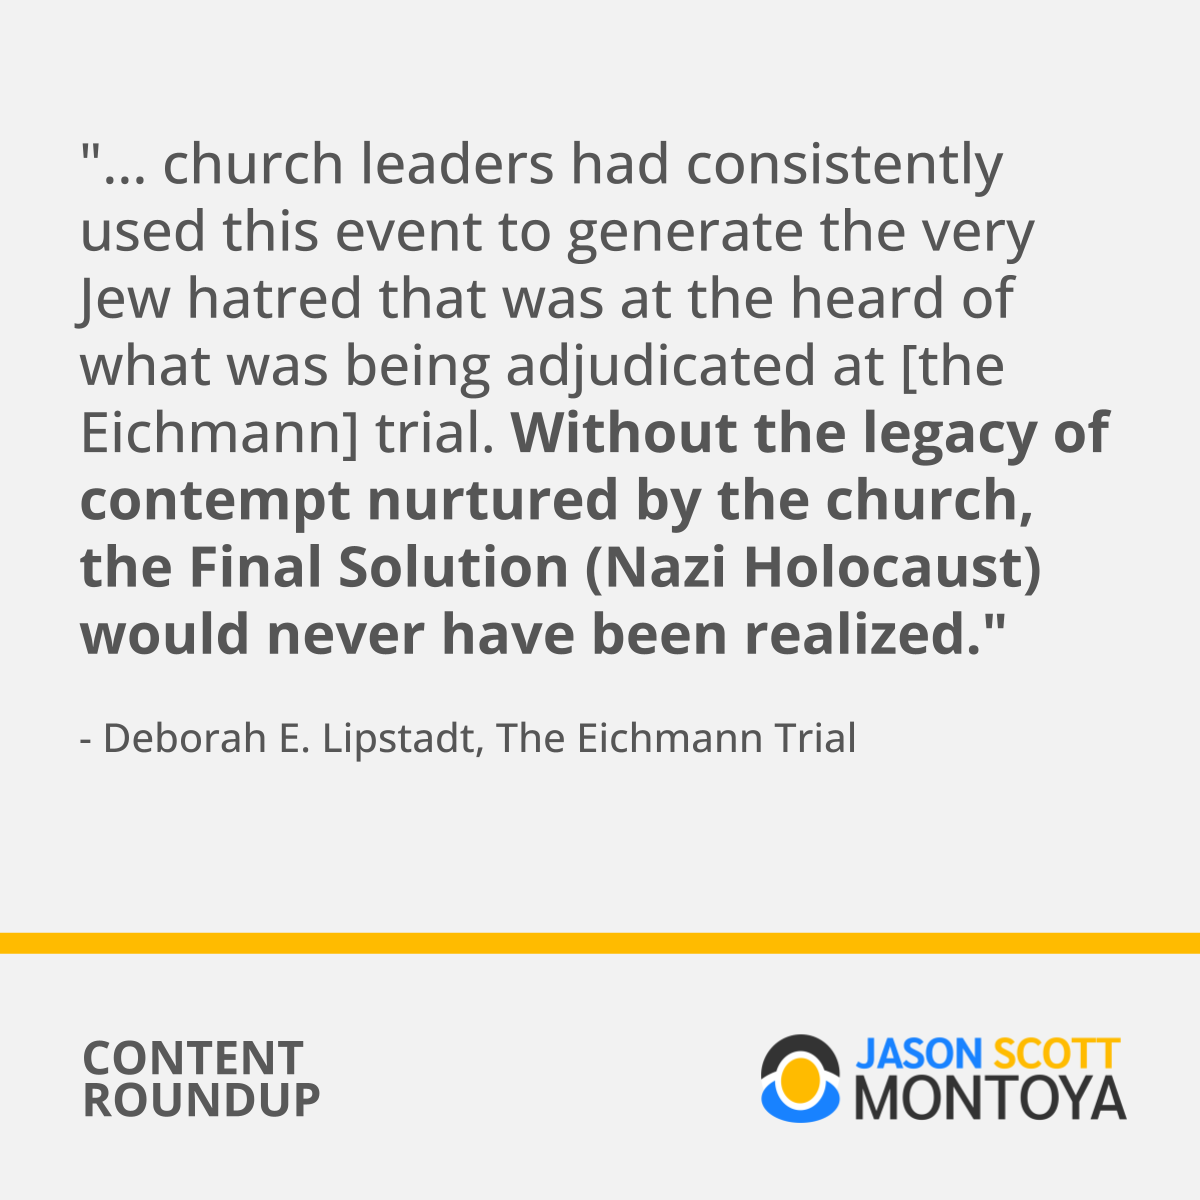 "... church leaders had consistently used this event to generate the very Jew hatred that was at the heart of what was being adjudicated at [the Eichmann] trial. Without the legacy of contempt nurtured by the church, the Final Solution (Nazi Holocaust) would never have been realized." - Deborah E. Lipstadt, The Eichmann Trial (Book)